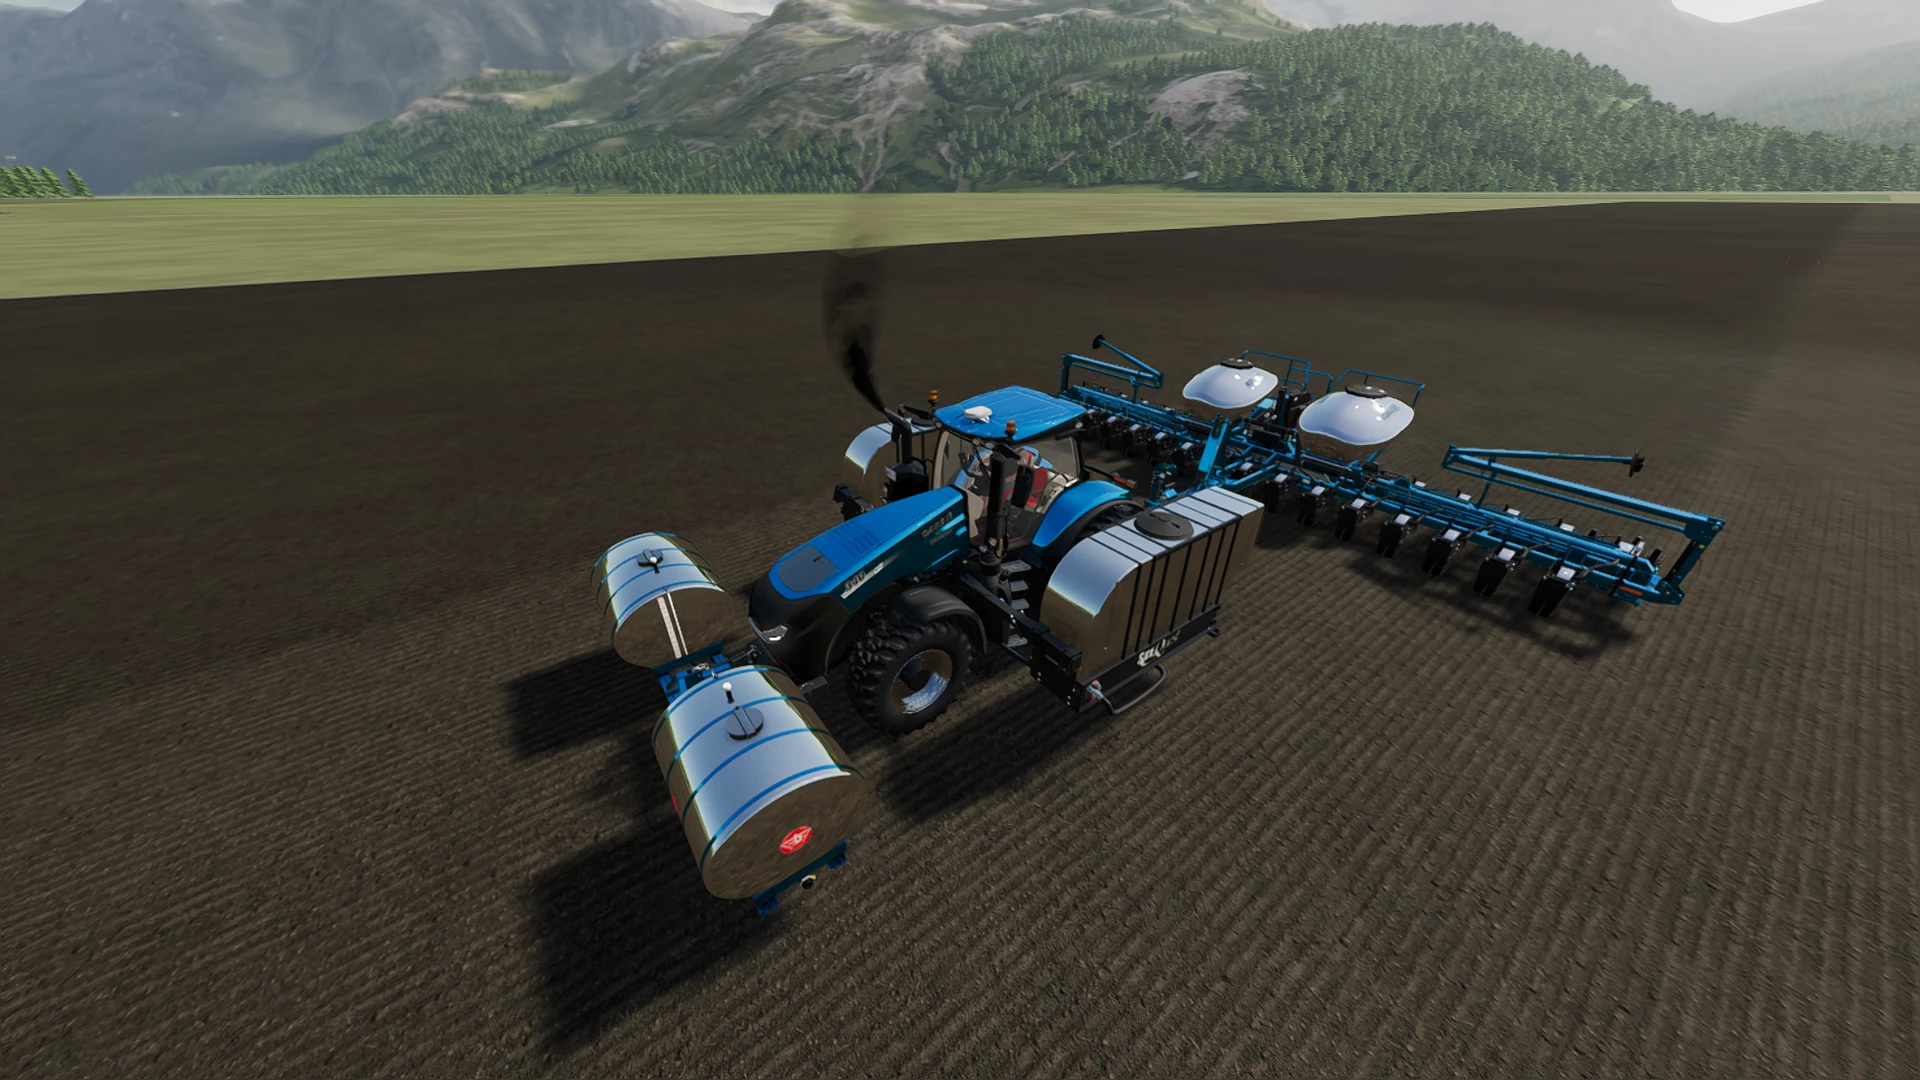 The Kinze 3665